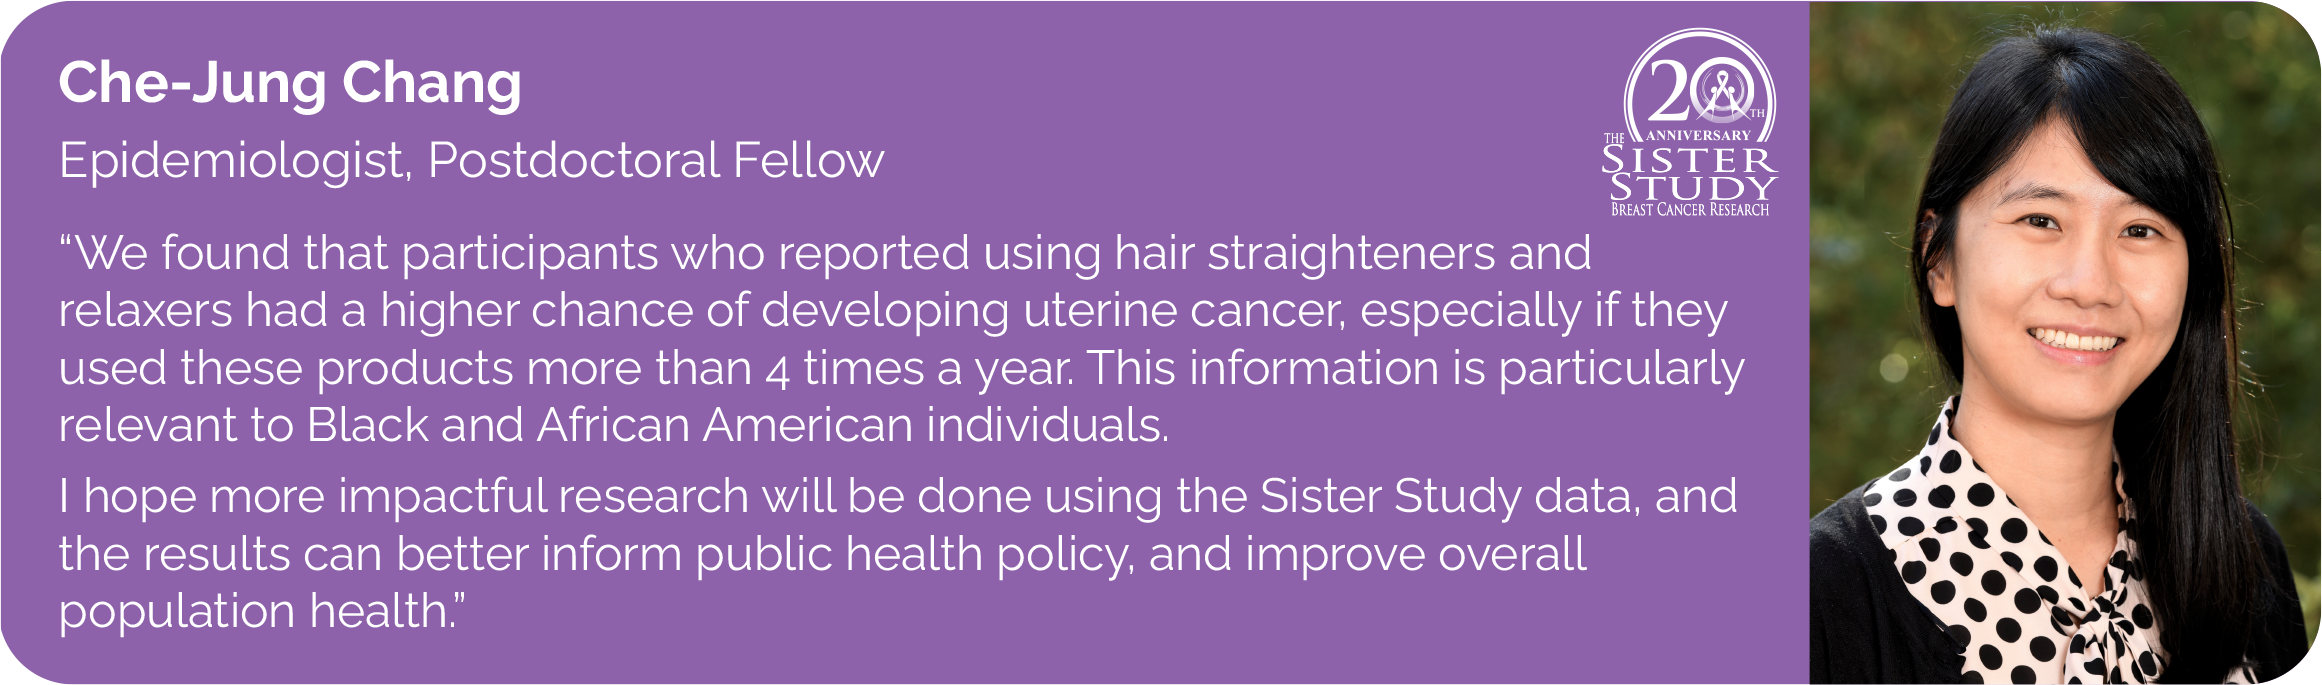 Chejung Chang
Epidemiologist, Postdoctoral Fellow
- We found that participants who reported using hair straighteners and
relaxers are associated with a higher risk of uterine cancer, especially particularly among those who used these products more than 4 times a year.
This information is particularly relevant to Black and African individuals. I hope more impactful research will be done using the Sister Study data, and the results can better inform public health policy, and improve overall population health.